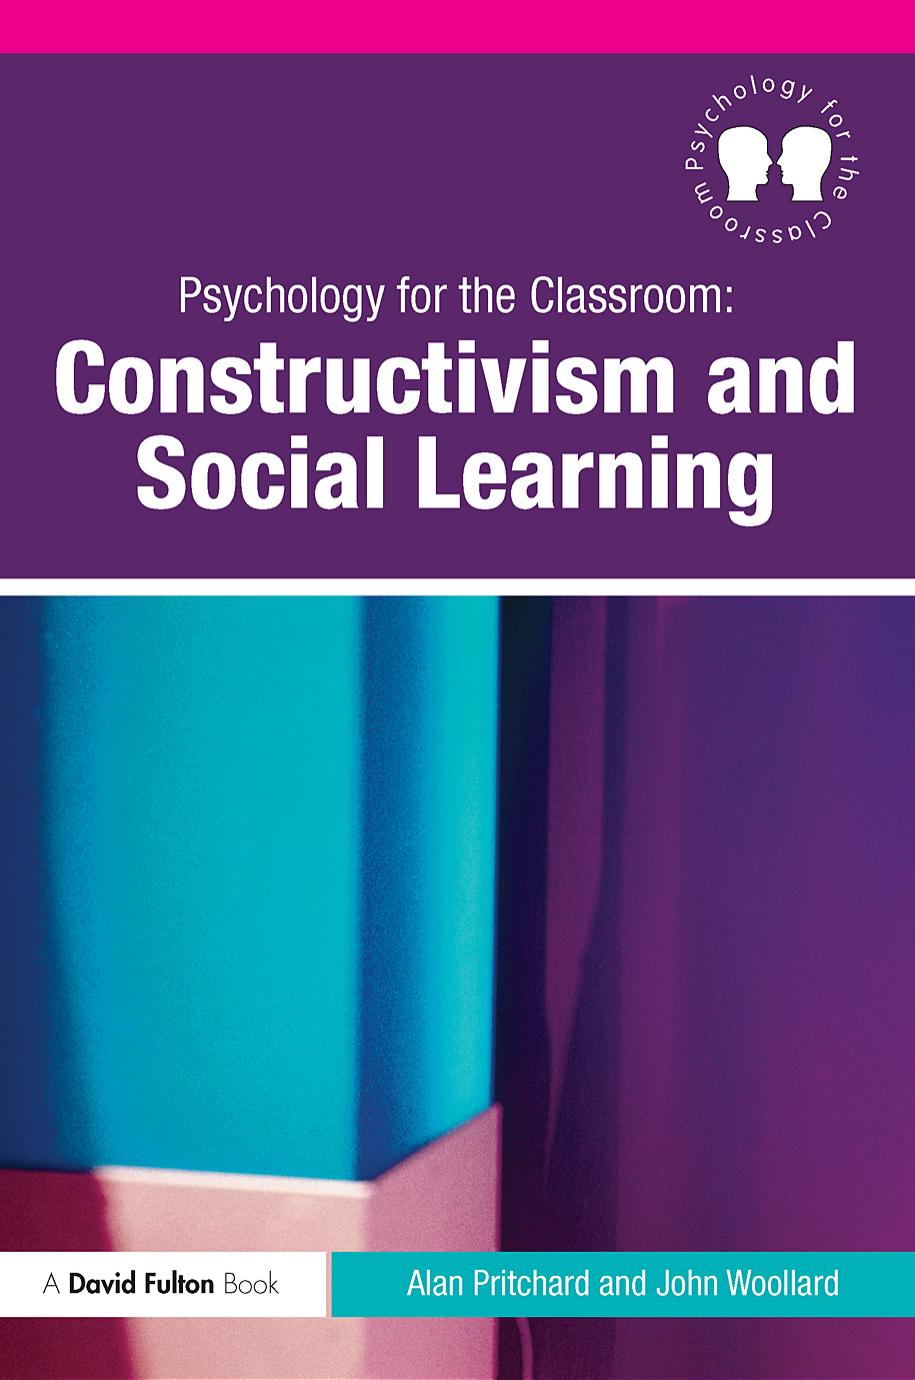 Psychology for the Classroom  Constructivism and Social Learning-Routledge (2010)